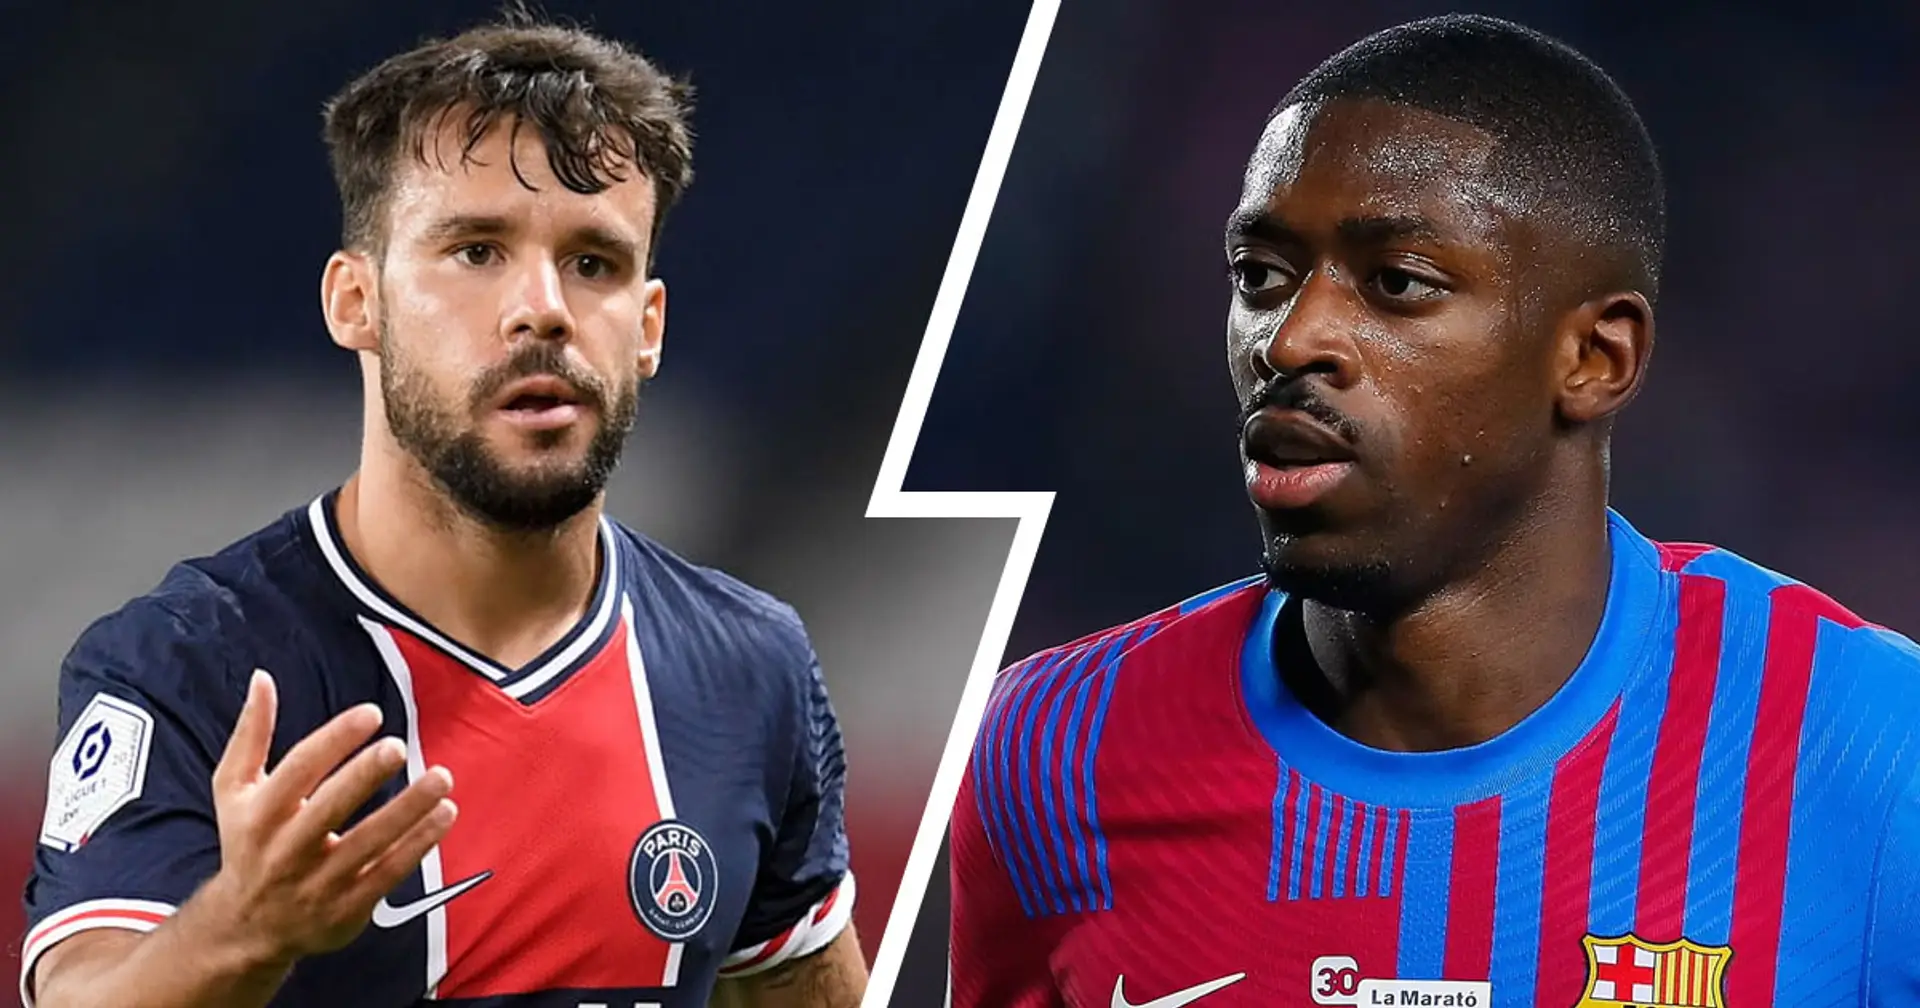 PSG reportedly ready to offer Juan Bernat in part-exchange deal for Ousmane Dembele